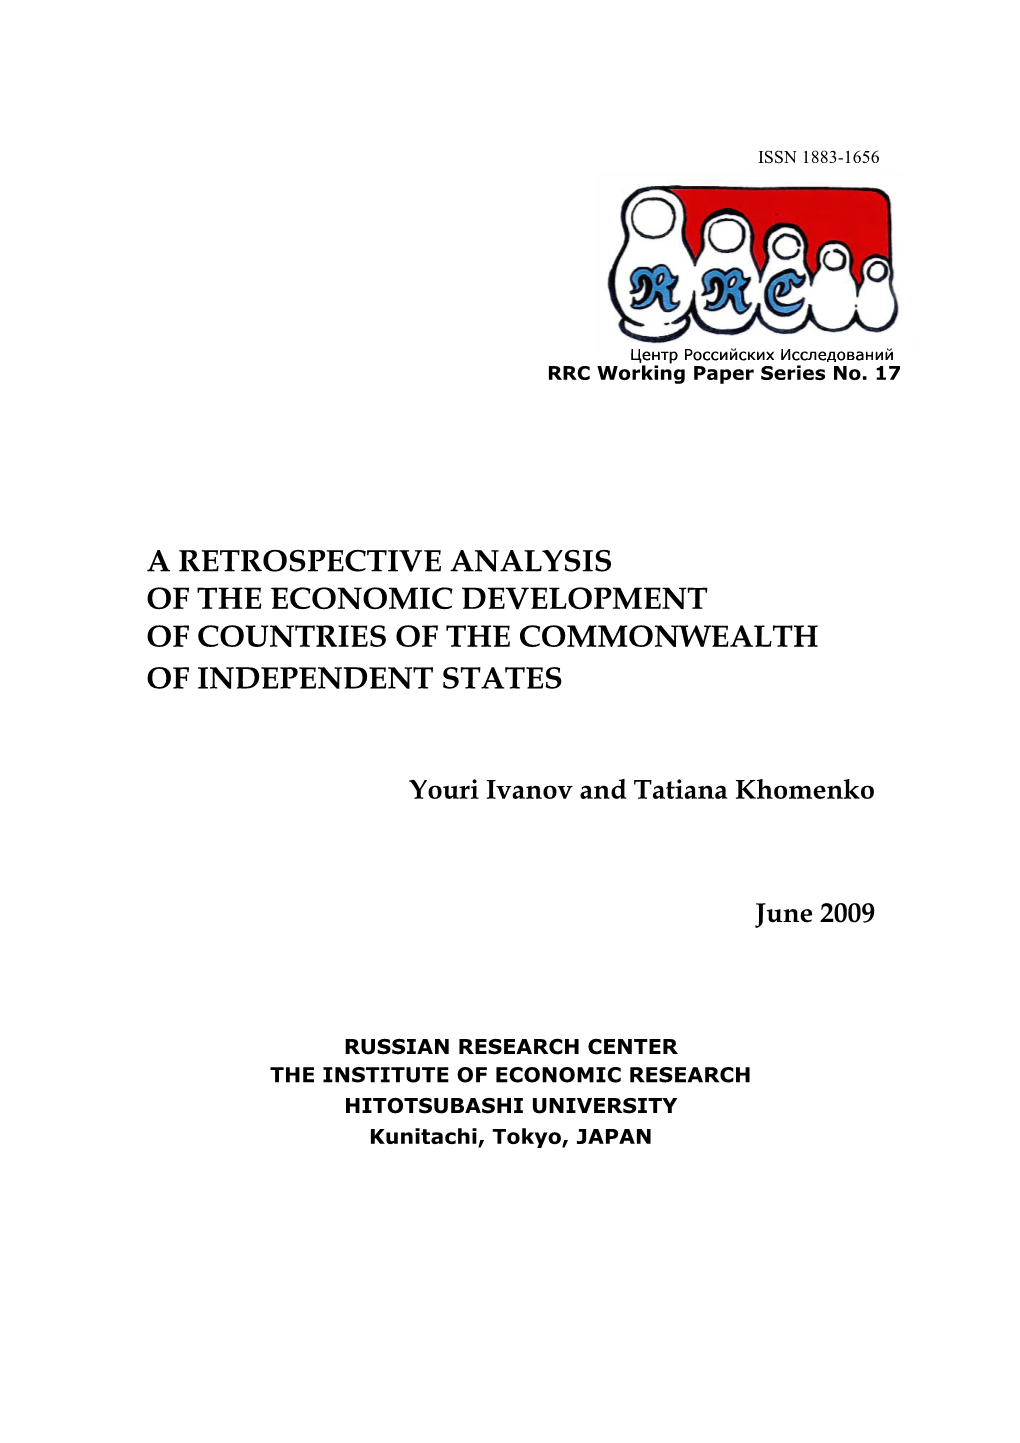 A Retrospective Analysis of the Economic Development of Countries of the Commonwealth of Independent States